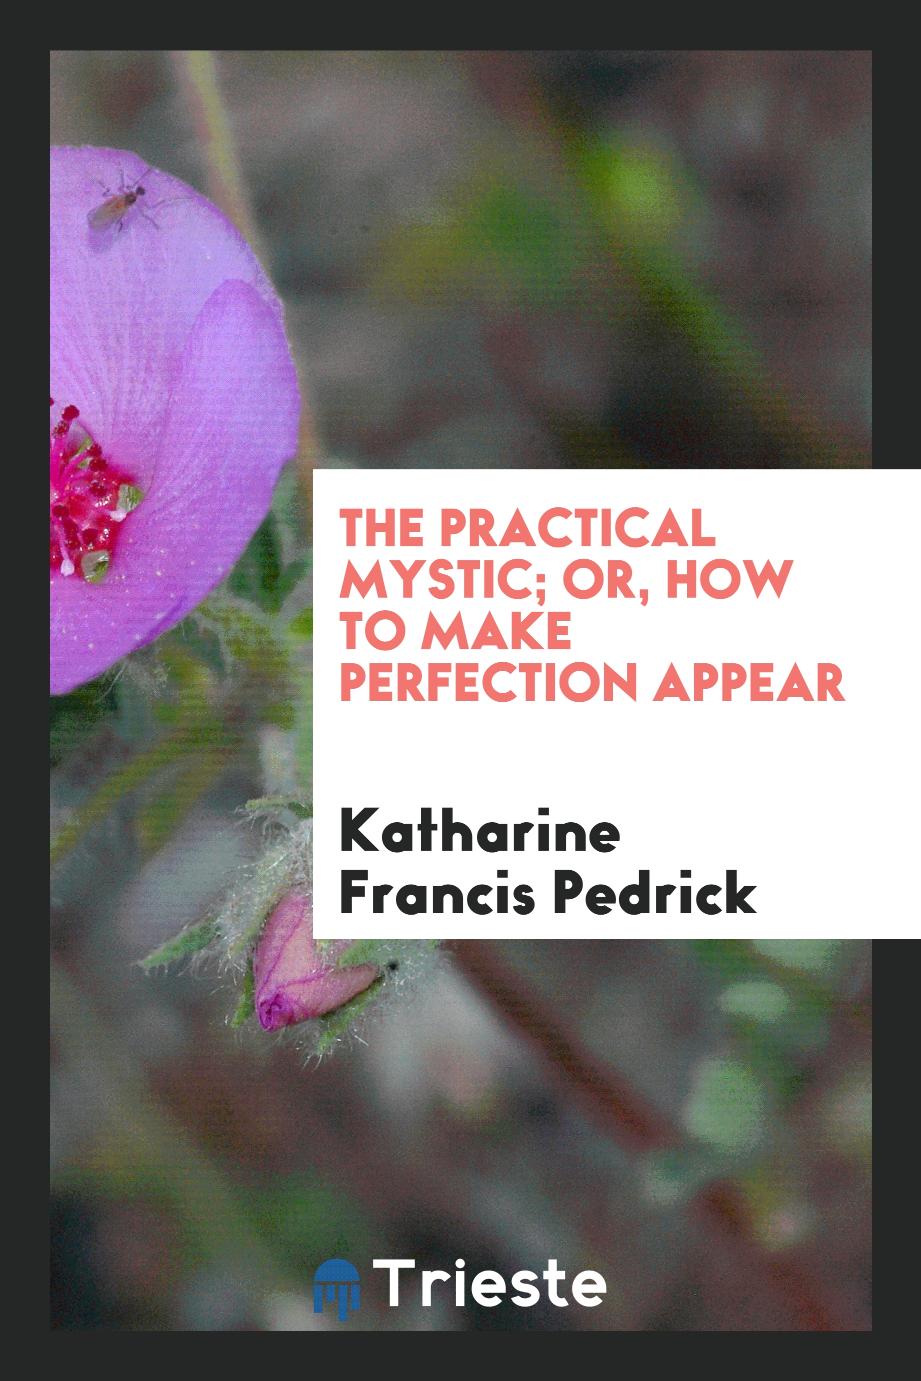 The practical mystic; or, How to make perfection appear